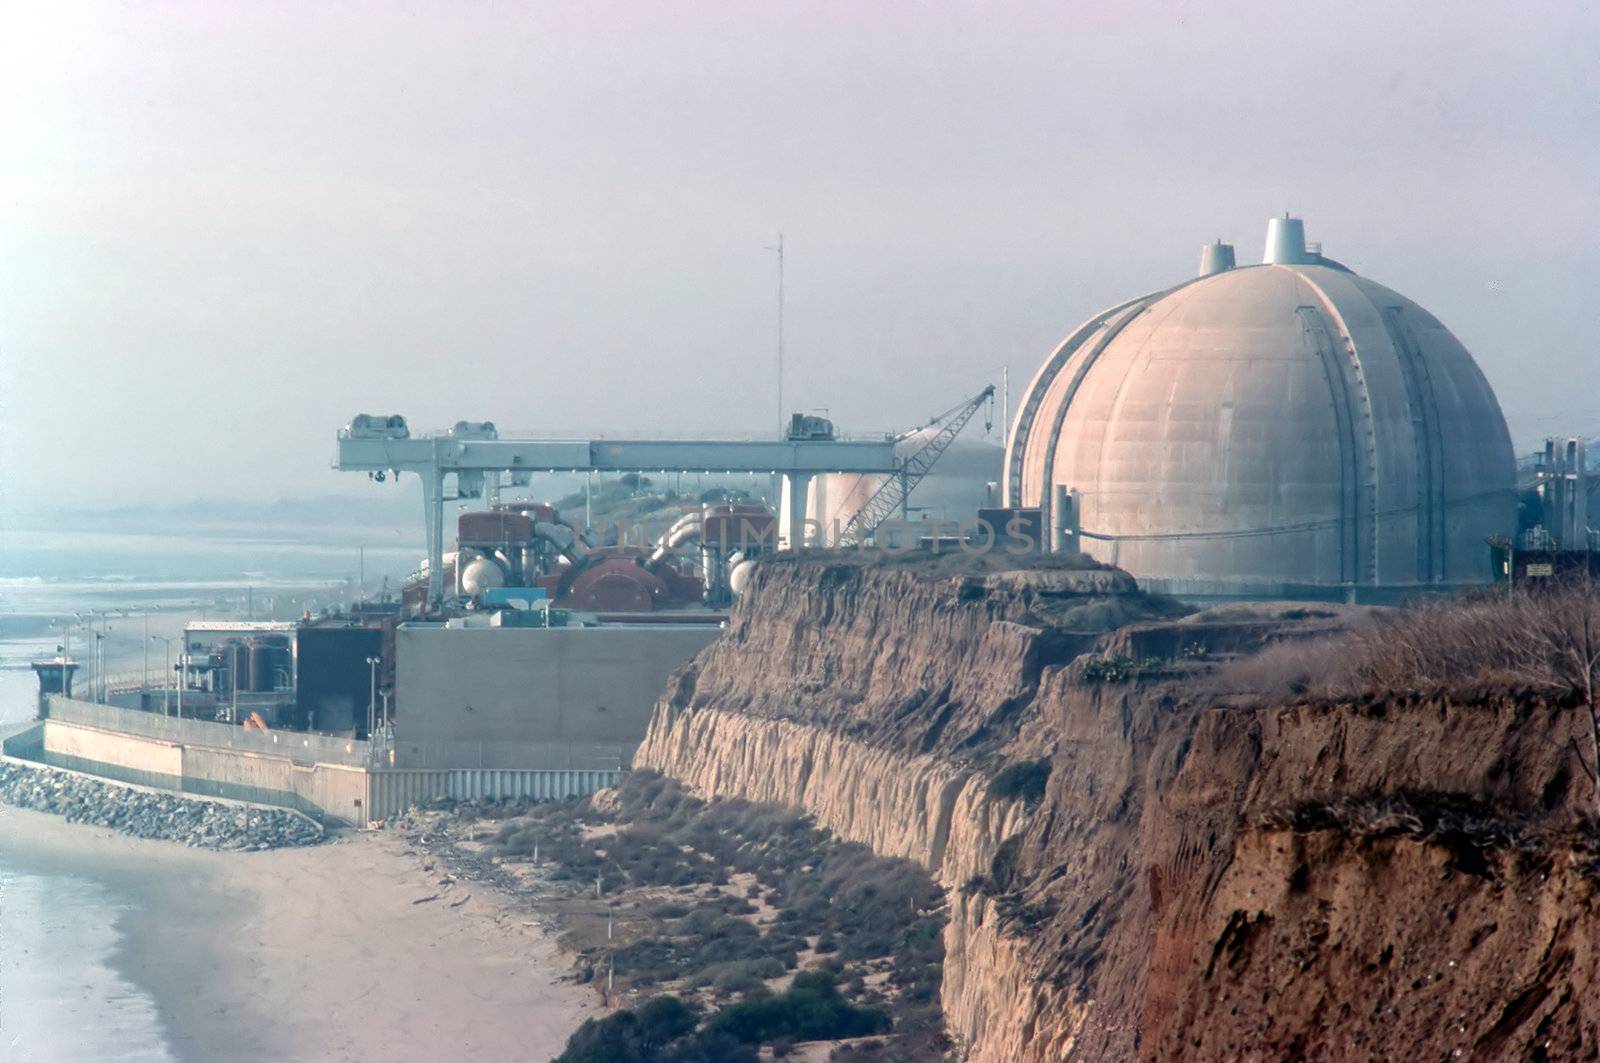 Nuclear Power Plant in San Onofre, California by jol66